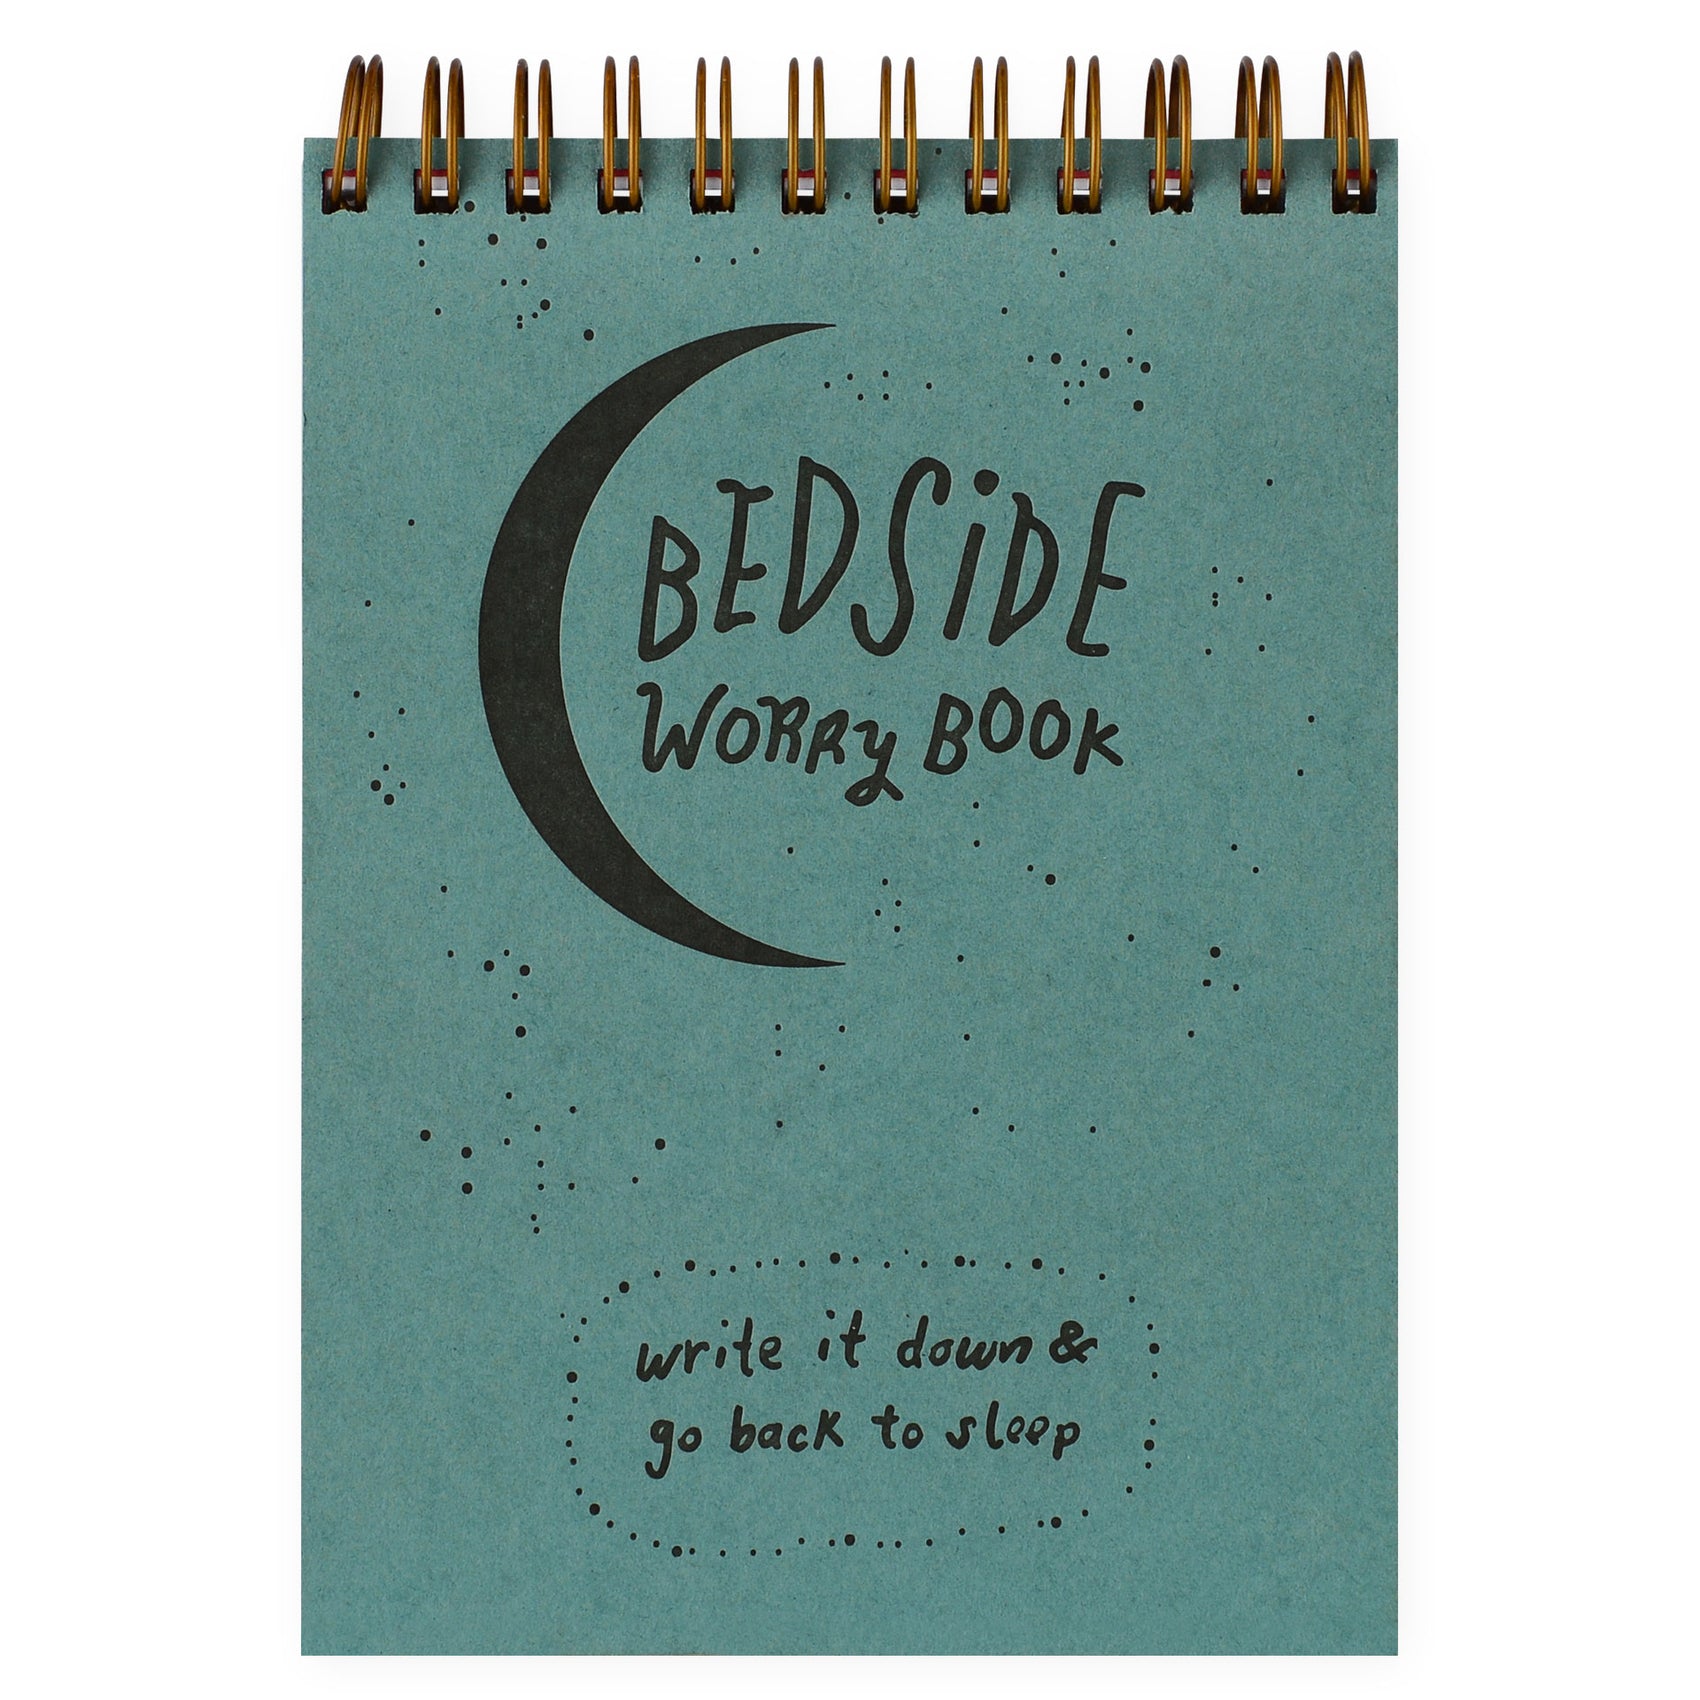 Bedside Worry Book